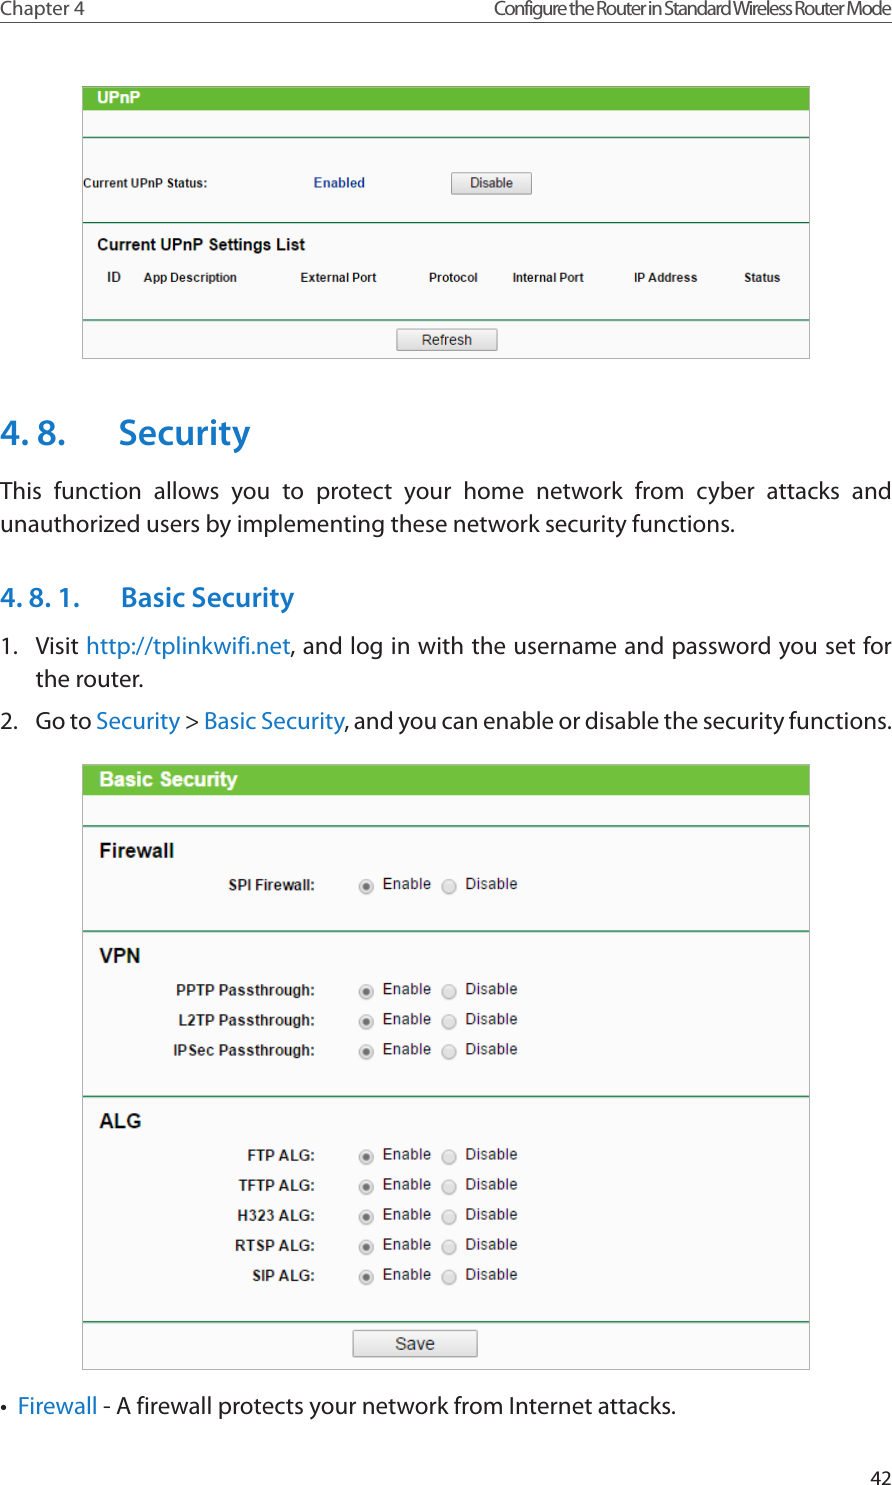 42Chapter 4 Configure the Router in Standard Wireless Router Mode4. 8.  SecurityThis function allows you to protect your home network from cyber attacks and unauthorized users by implementing these network security functions.4. 8. 1.  Basic Security1.  Visit http://tplinkwifi.net, and log in with the username and password you set for the router.2.  Go to Security &gt; Basic Security, and you can enable or disable the security functions.•  Firewall - A firewall protects your network from Internet attacks.